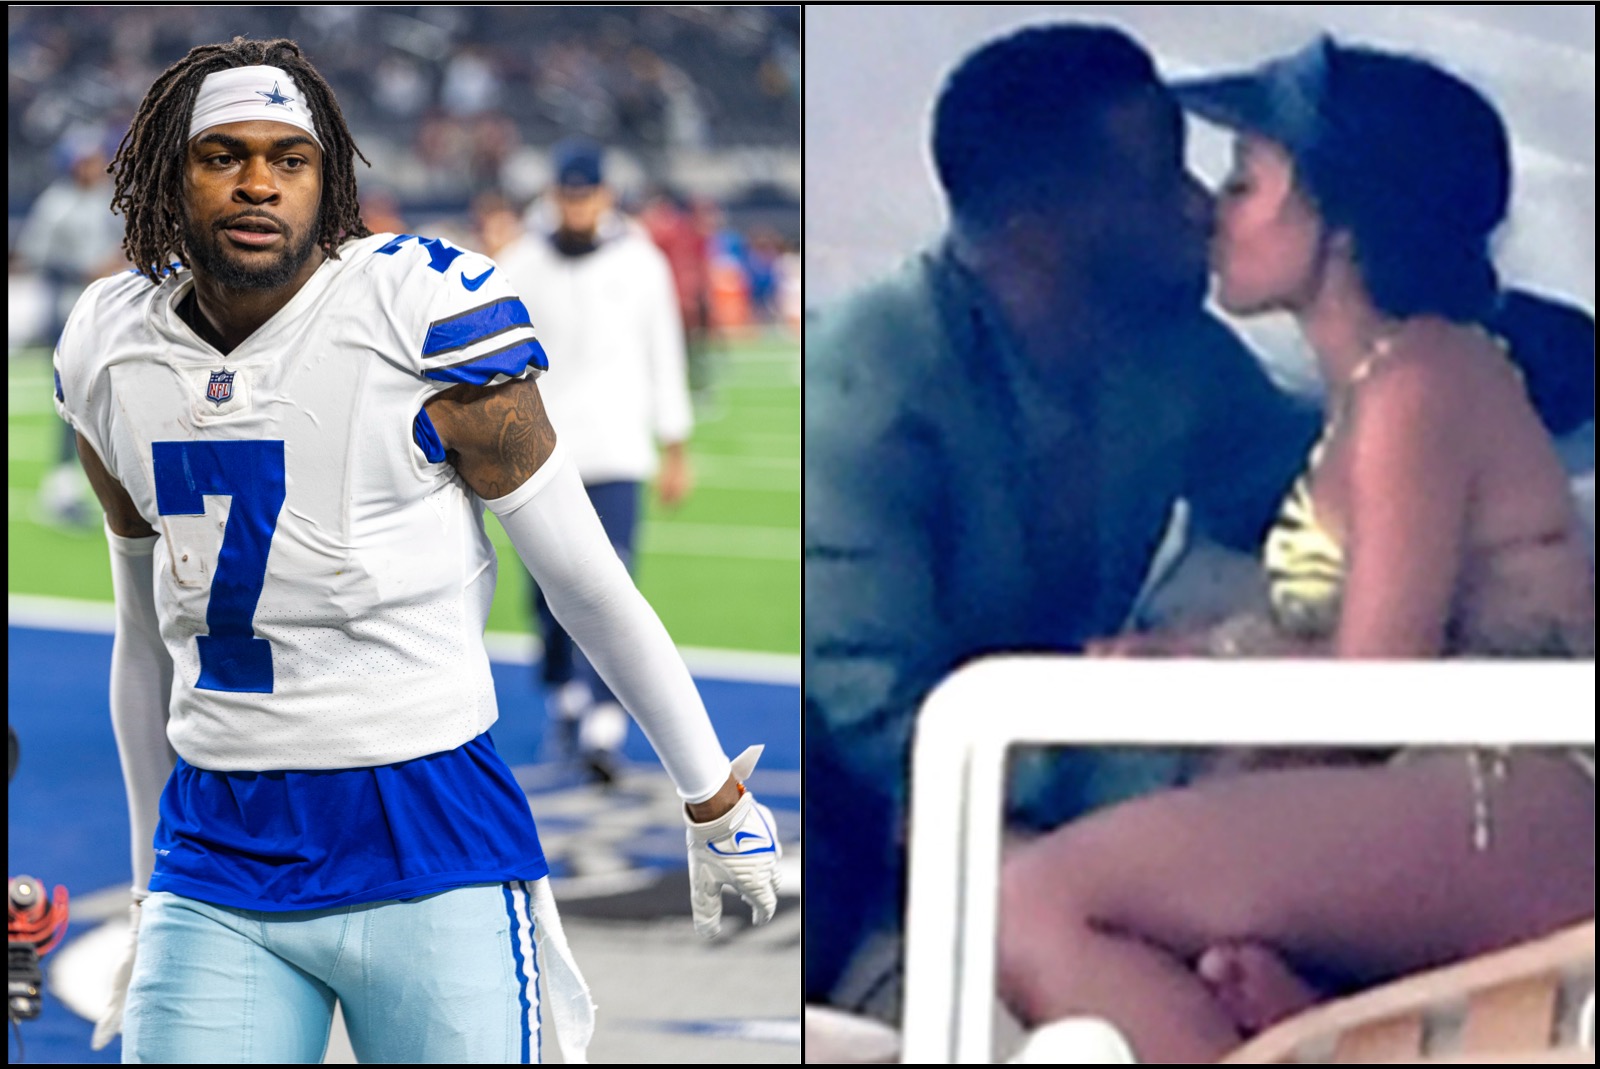 25-Year-Old Trevon Diggs Gets Tattoed of His 4th Baby Mama 35-Year-Old Joie Chavis Name on His Feet